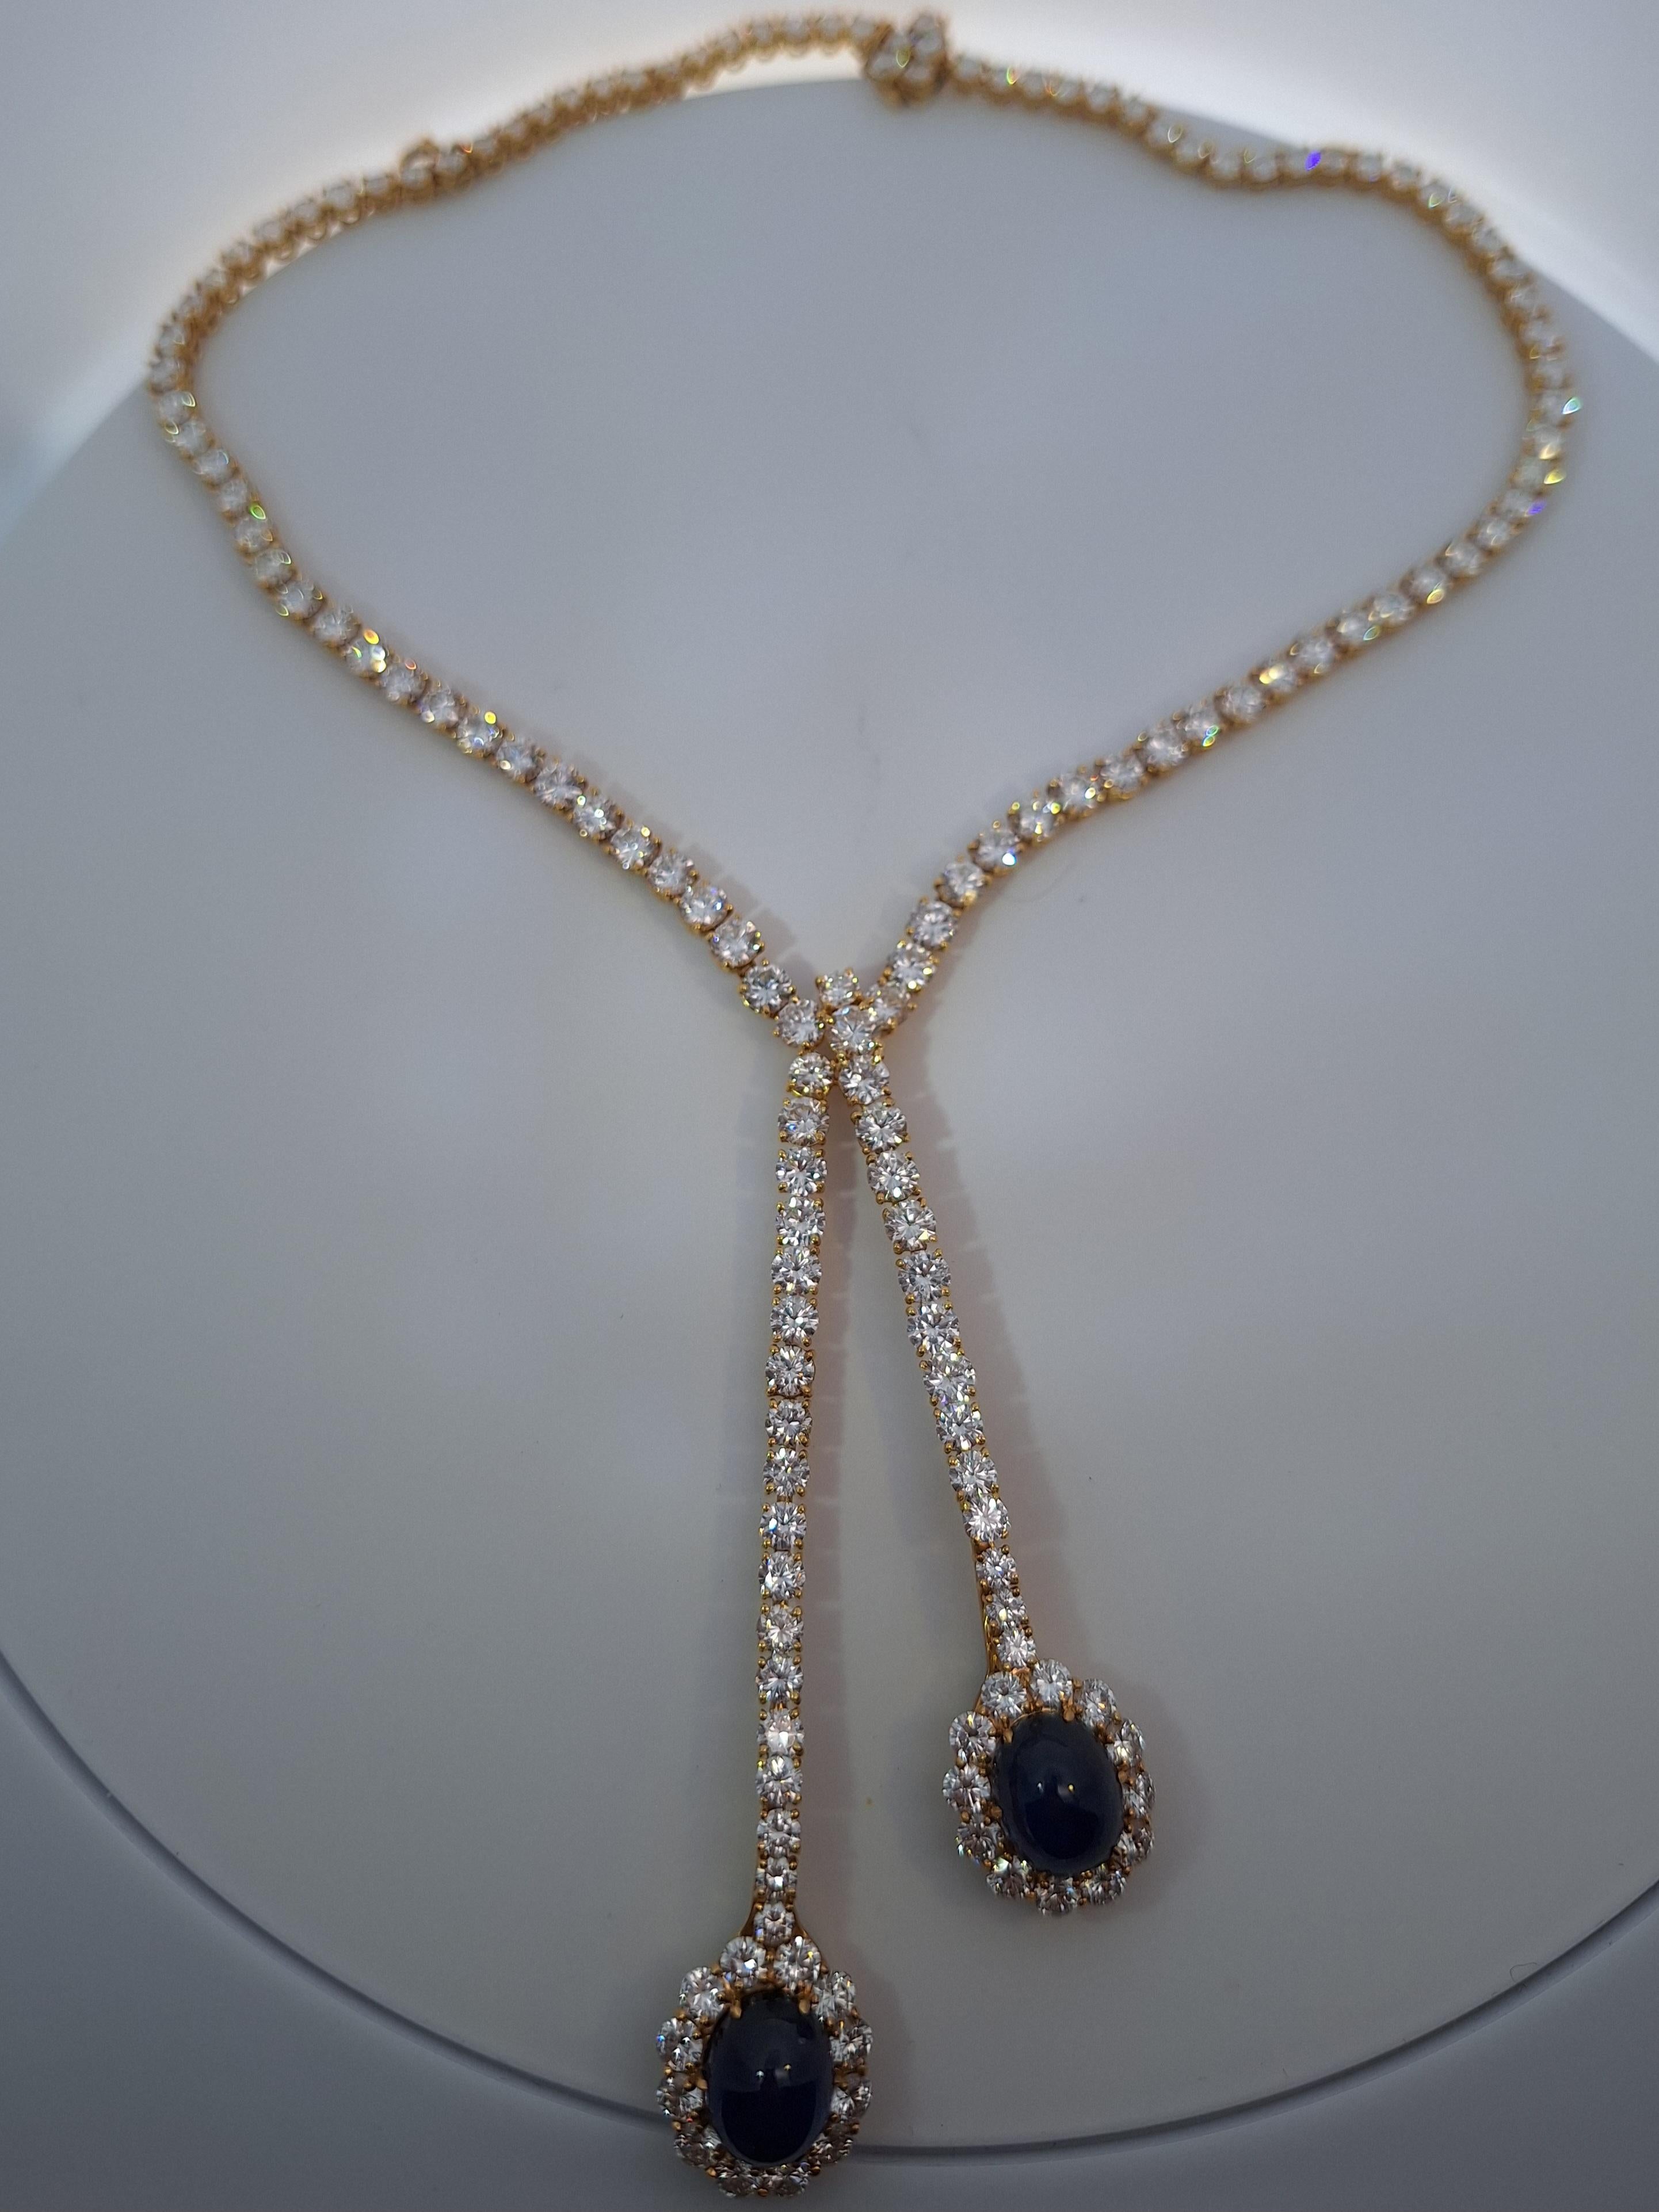 Harry Winston Sapphire & Diamond Necklace In Excellent Condition For Sale In New York, NY